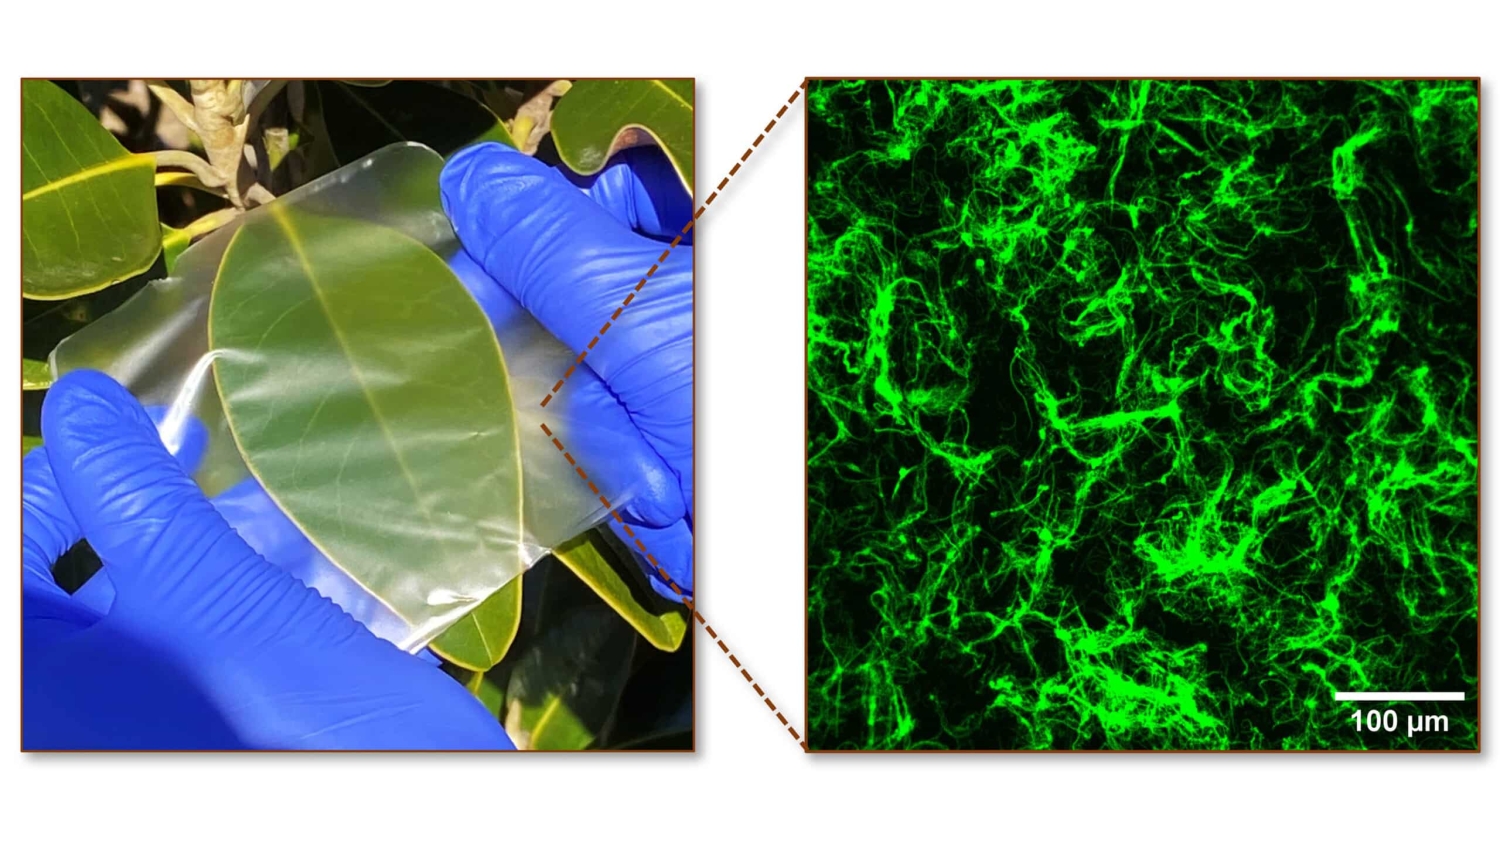 View of biopolymer film on left and microscopic view of the film on right.